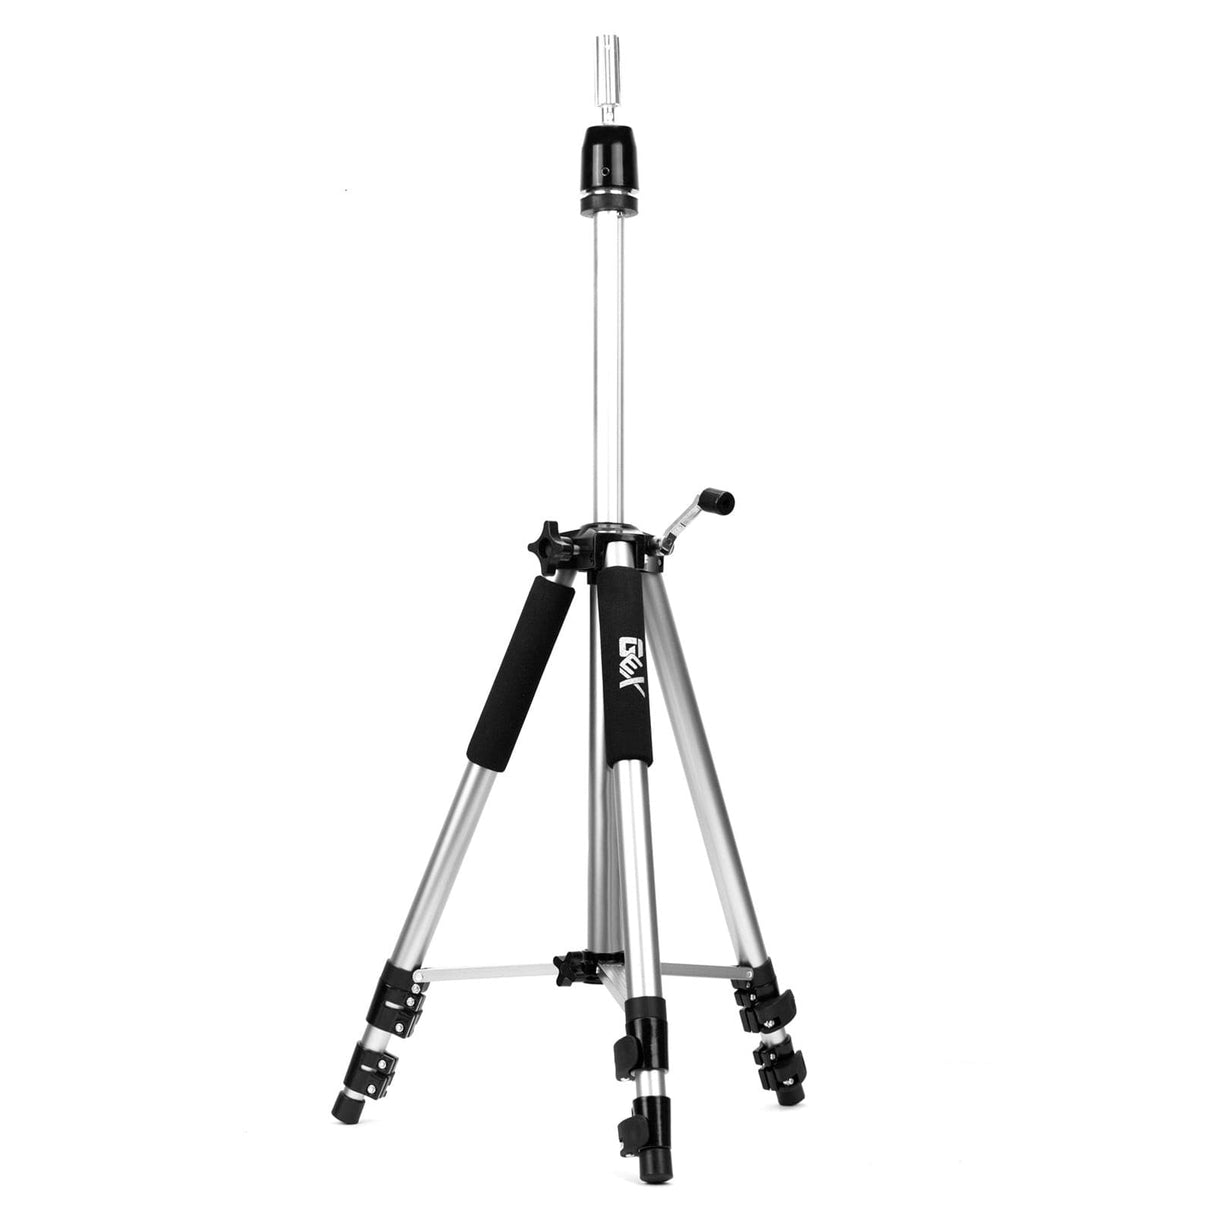 GEX Heavy Duty Canvas Block Head Tripod Mannequin Stand Silver Color - GexWorldwide